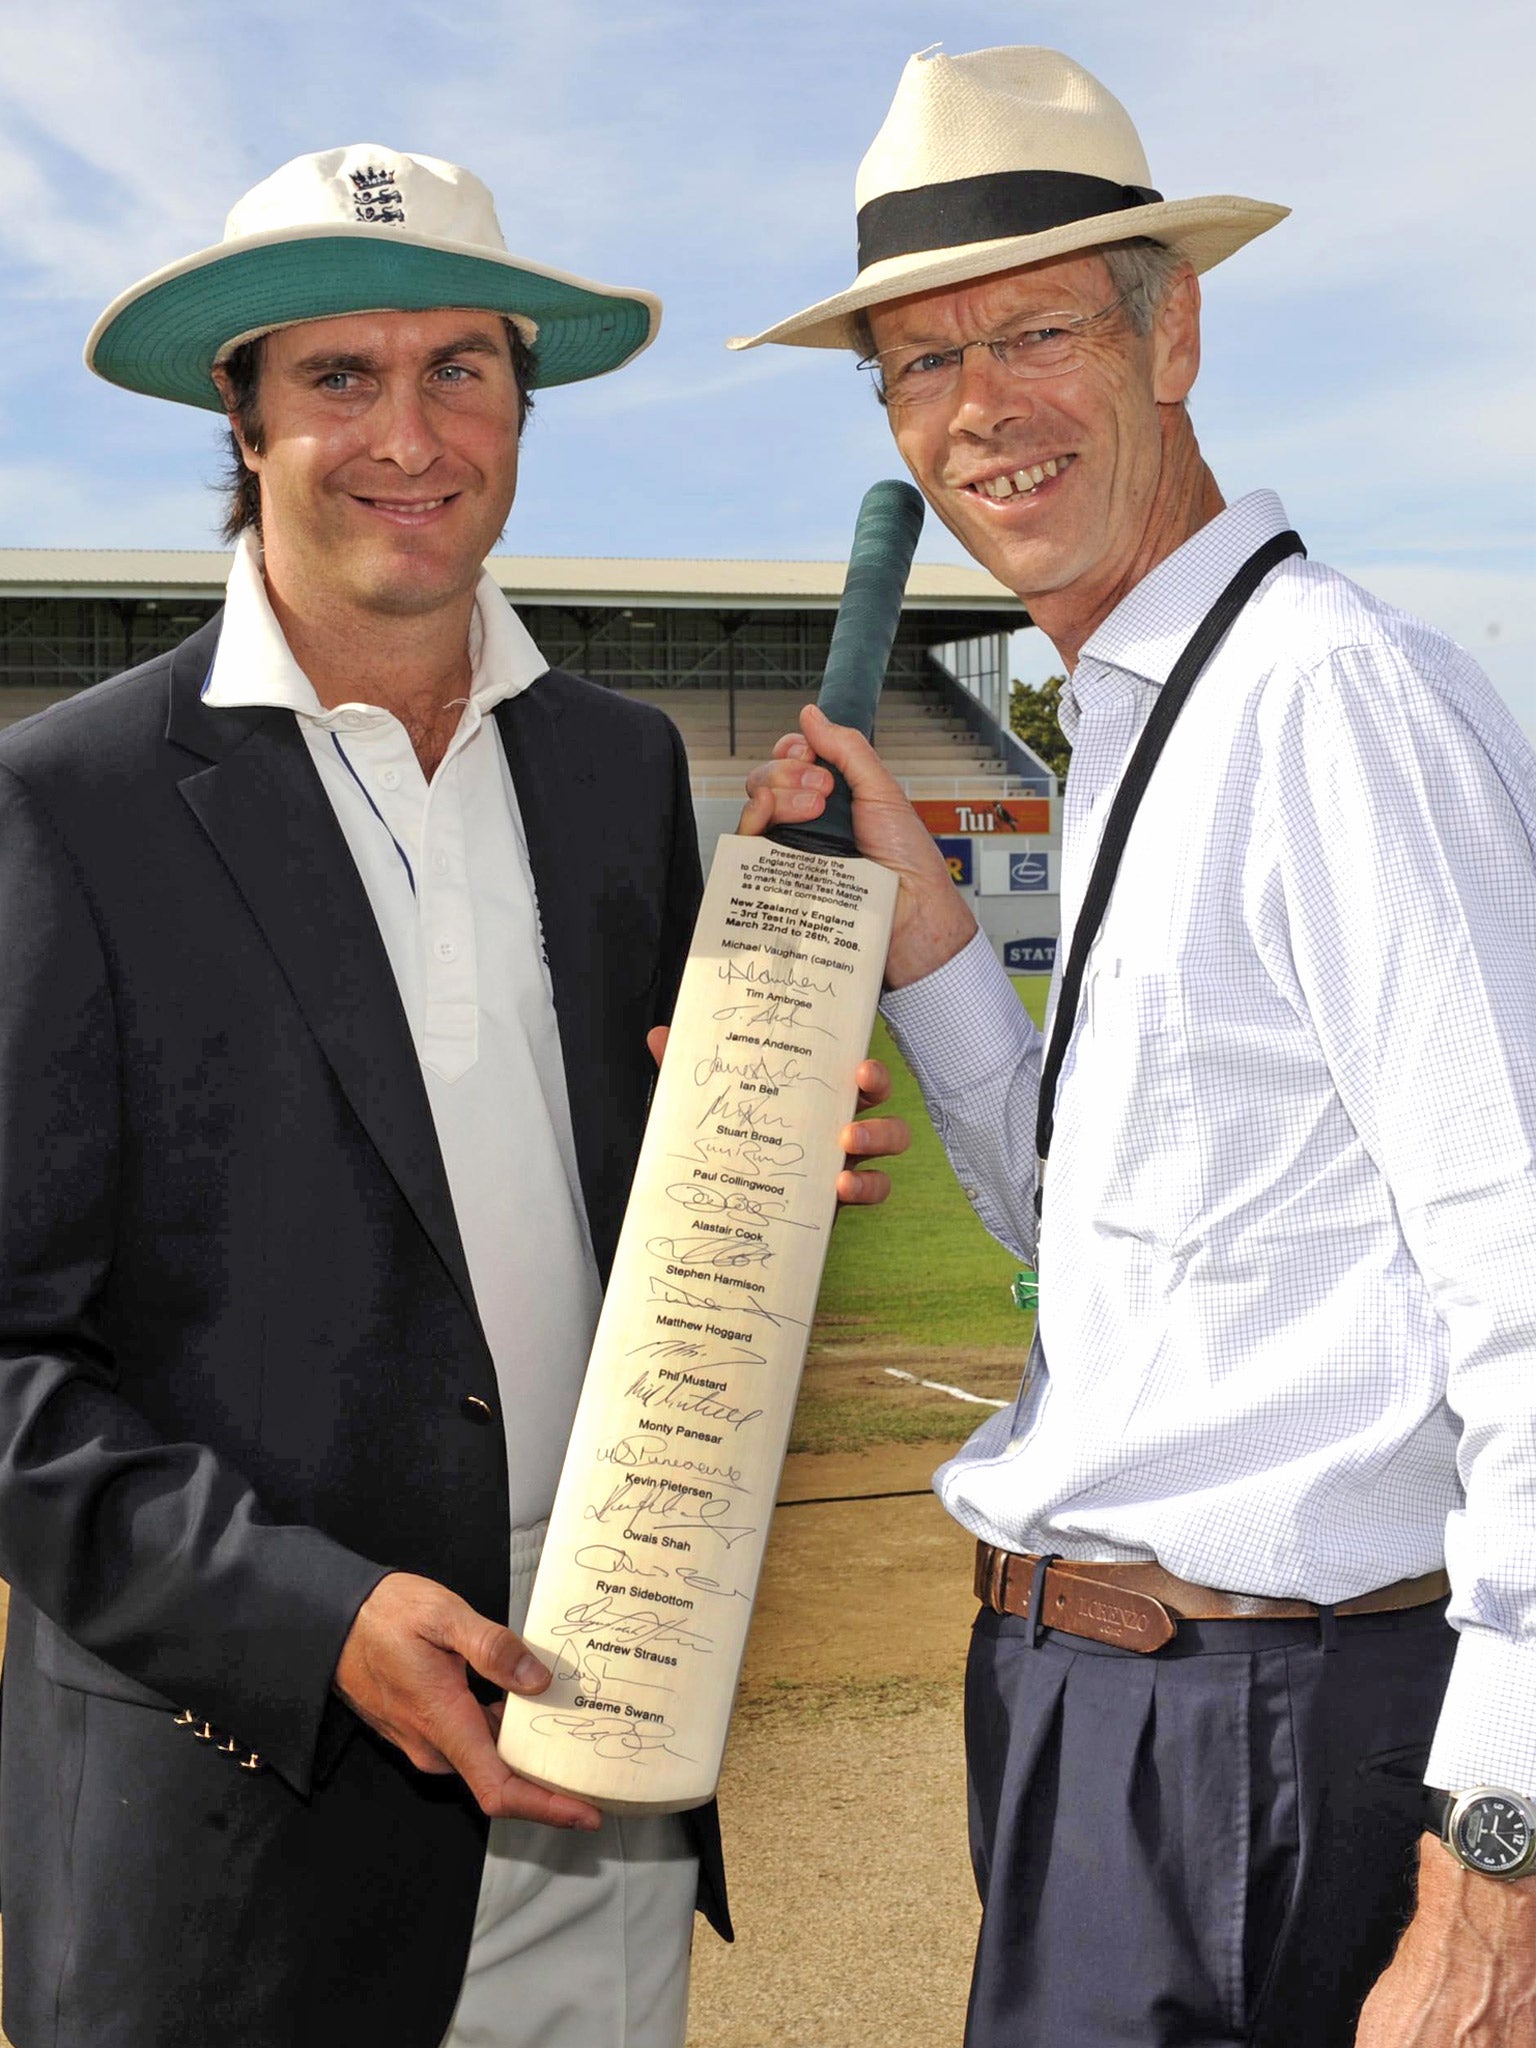 England captain Michael Vaughan presents a special bat to Christopher Martin-Jenkins in 2008